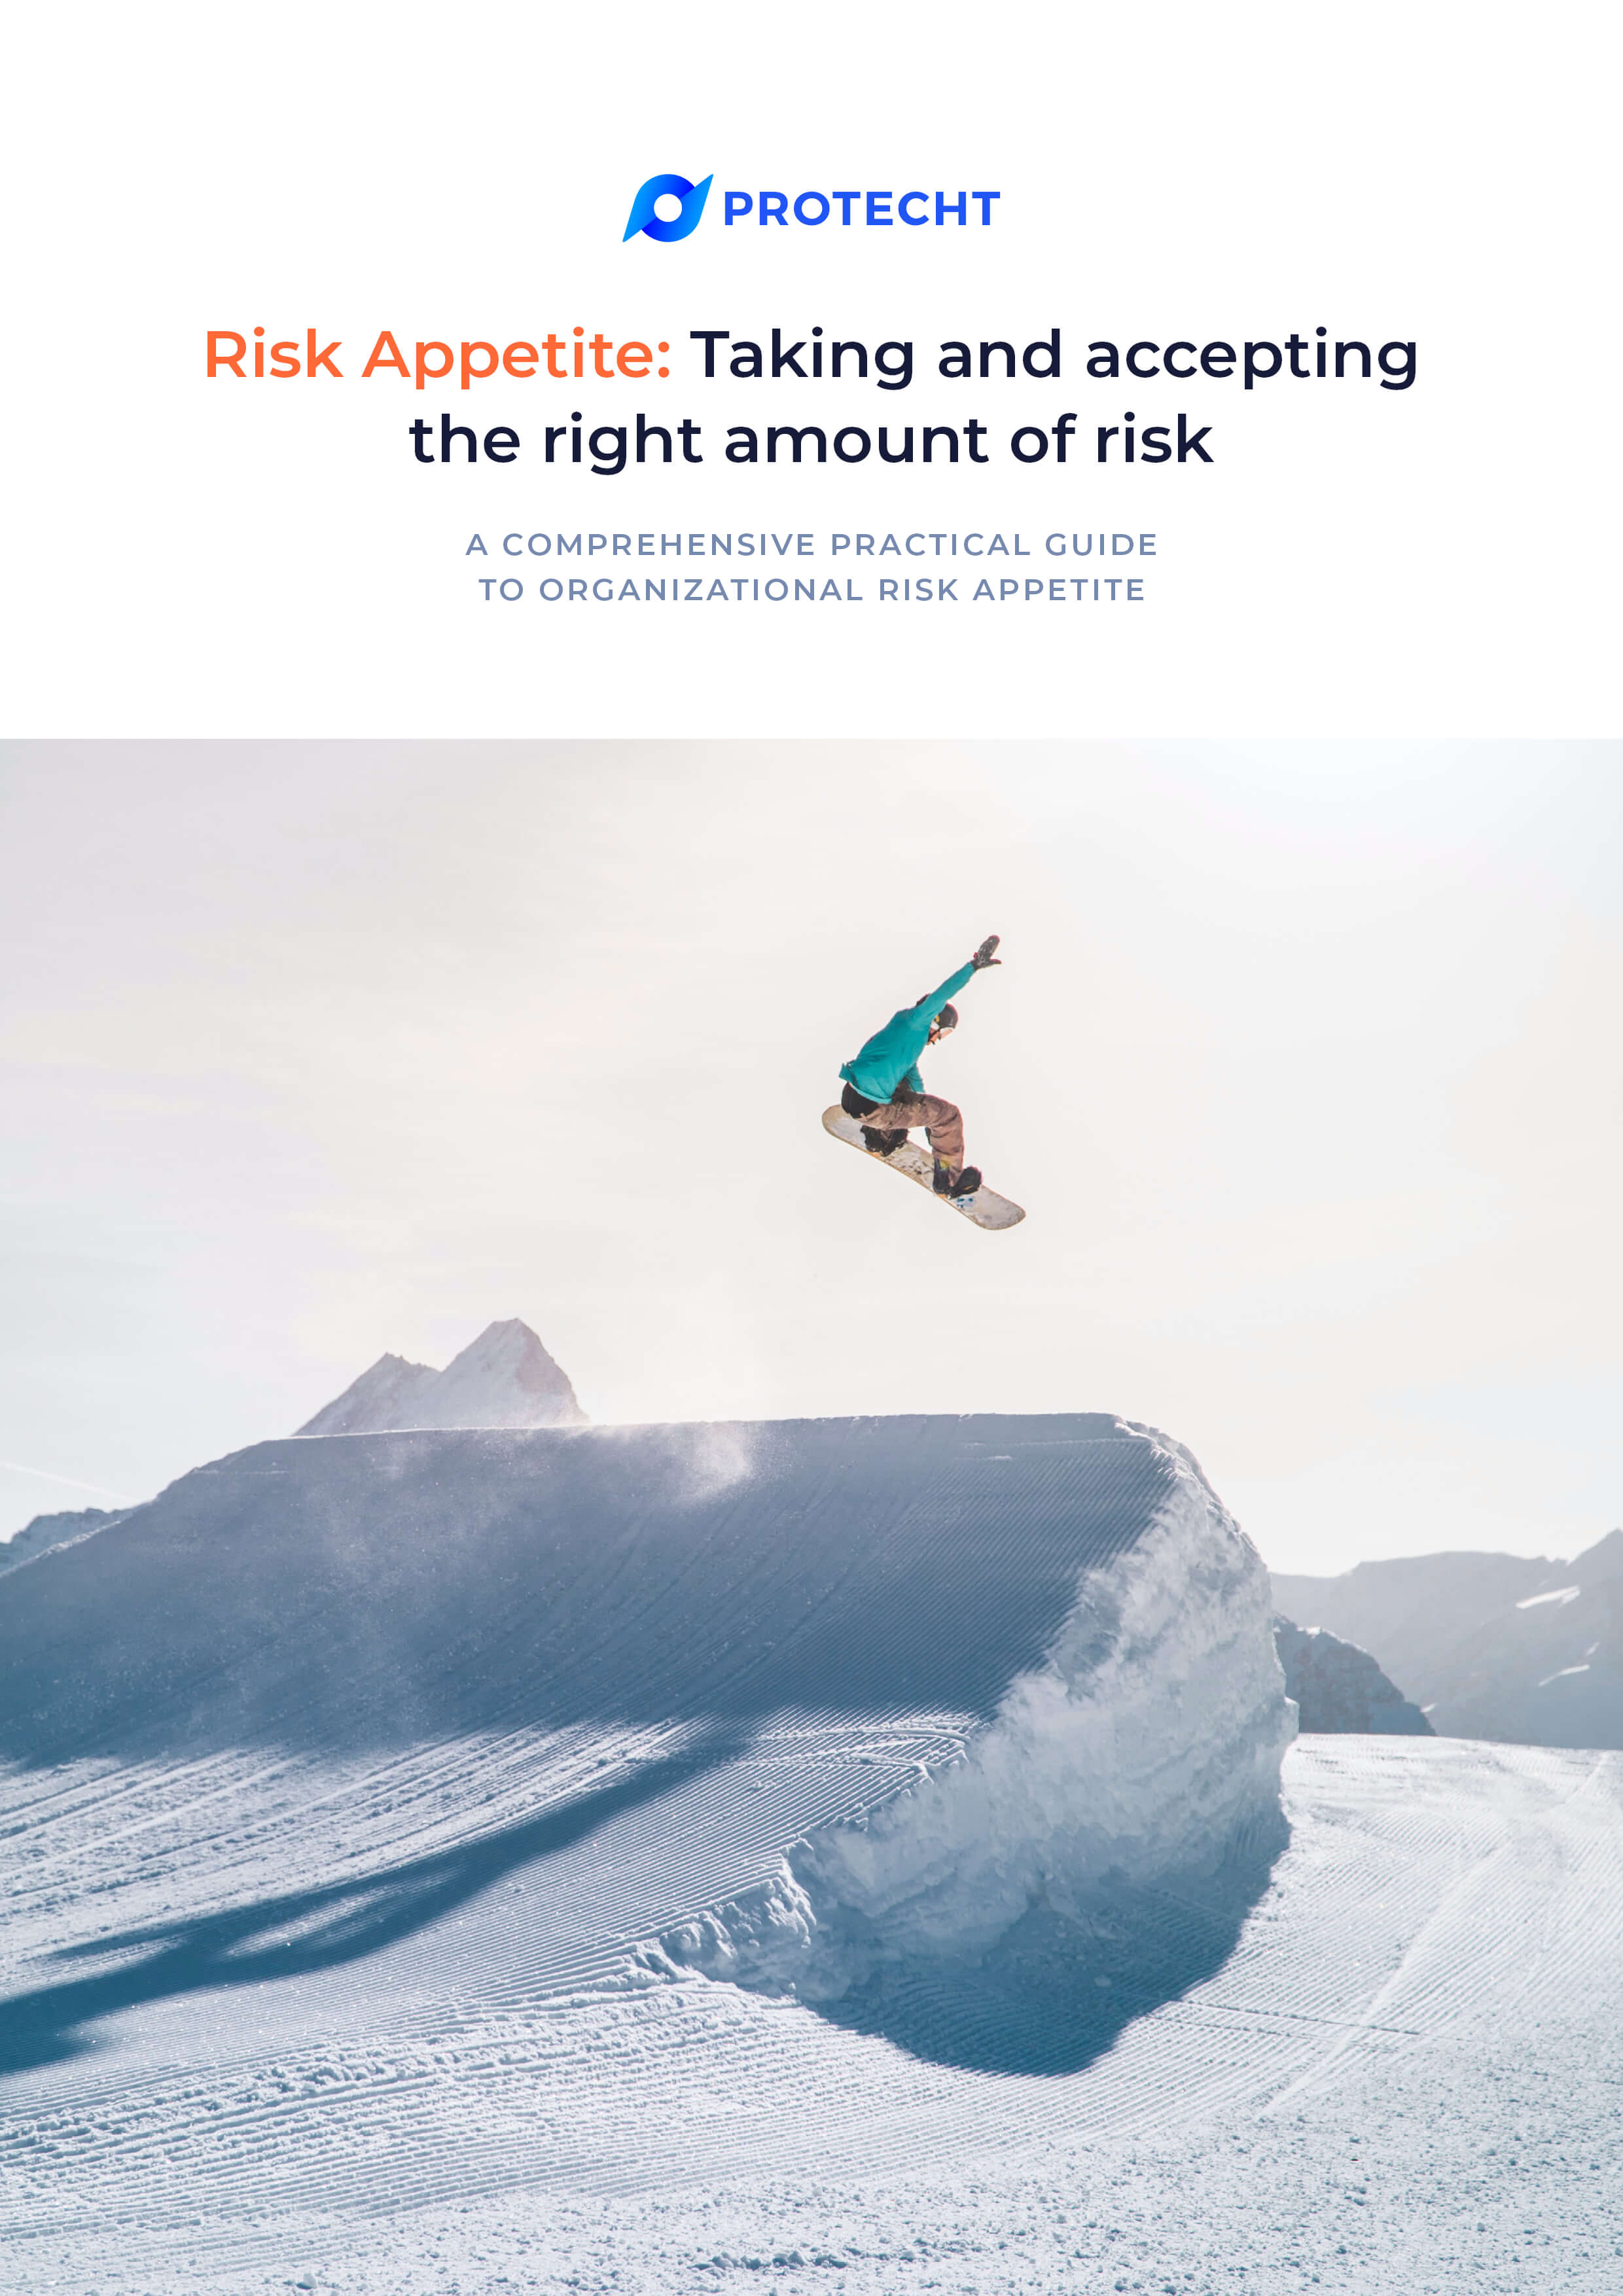 Risk Appetite ebook cover: Taking and accepting the right amount of risk